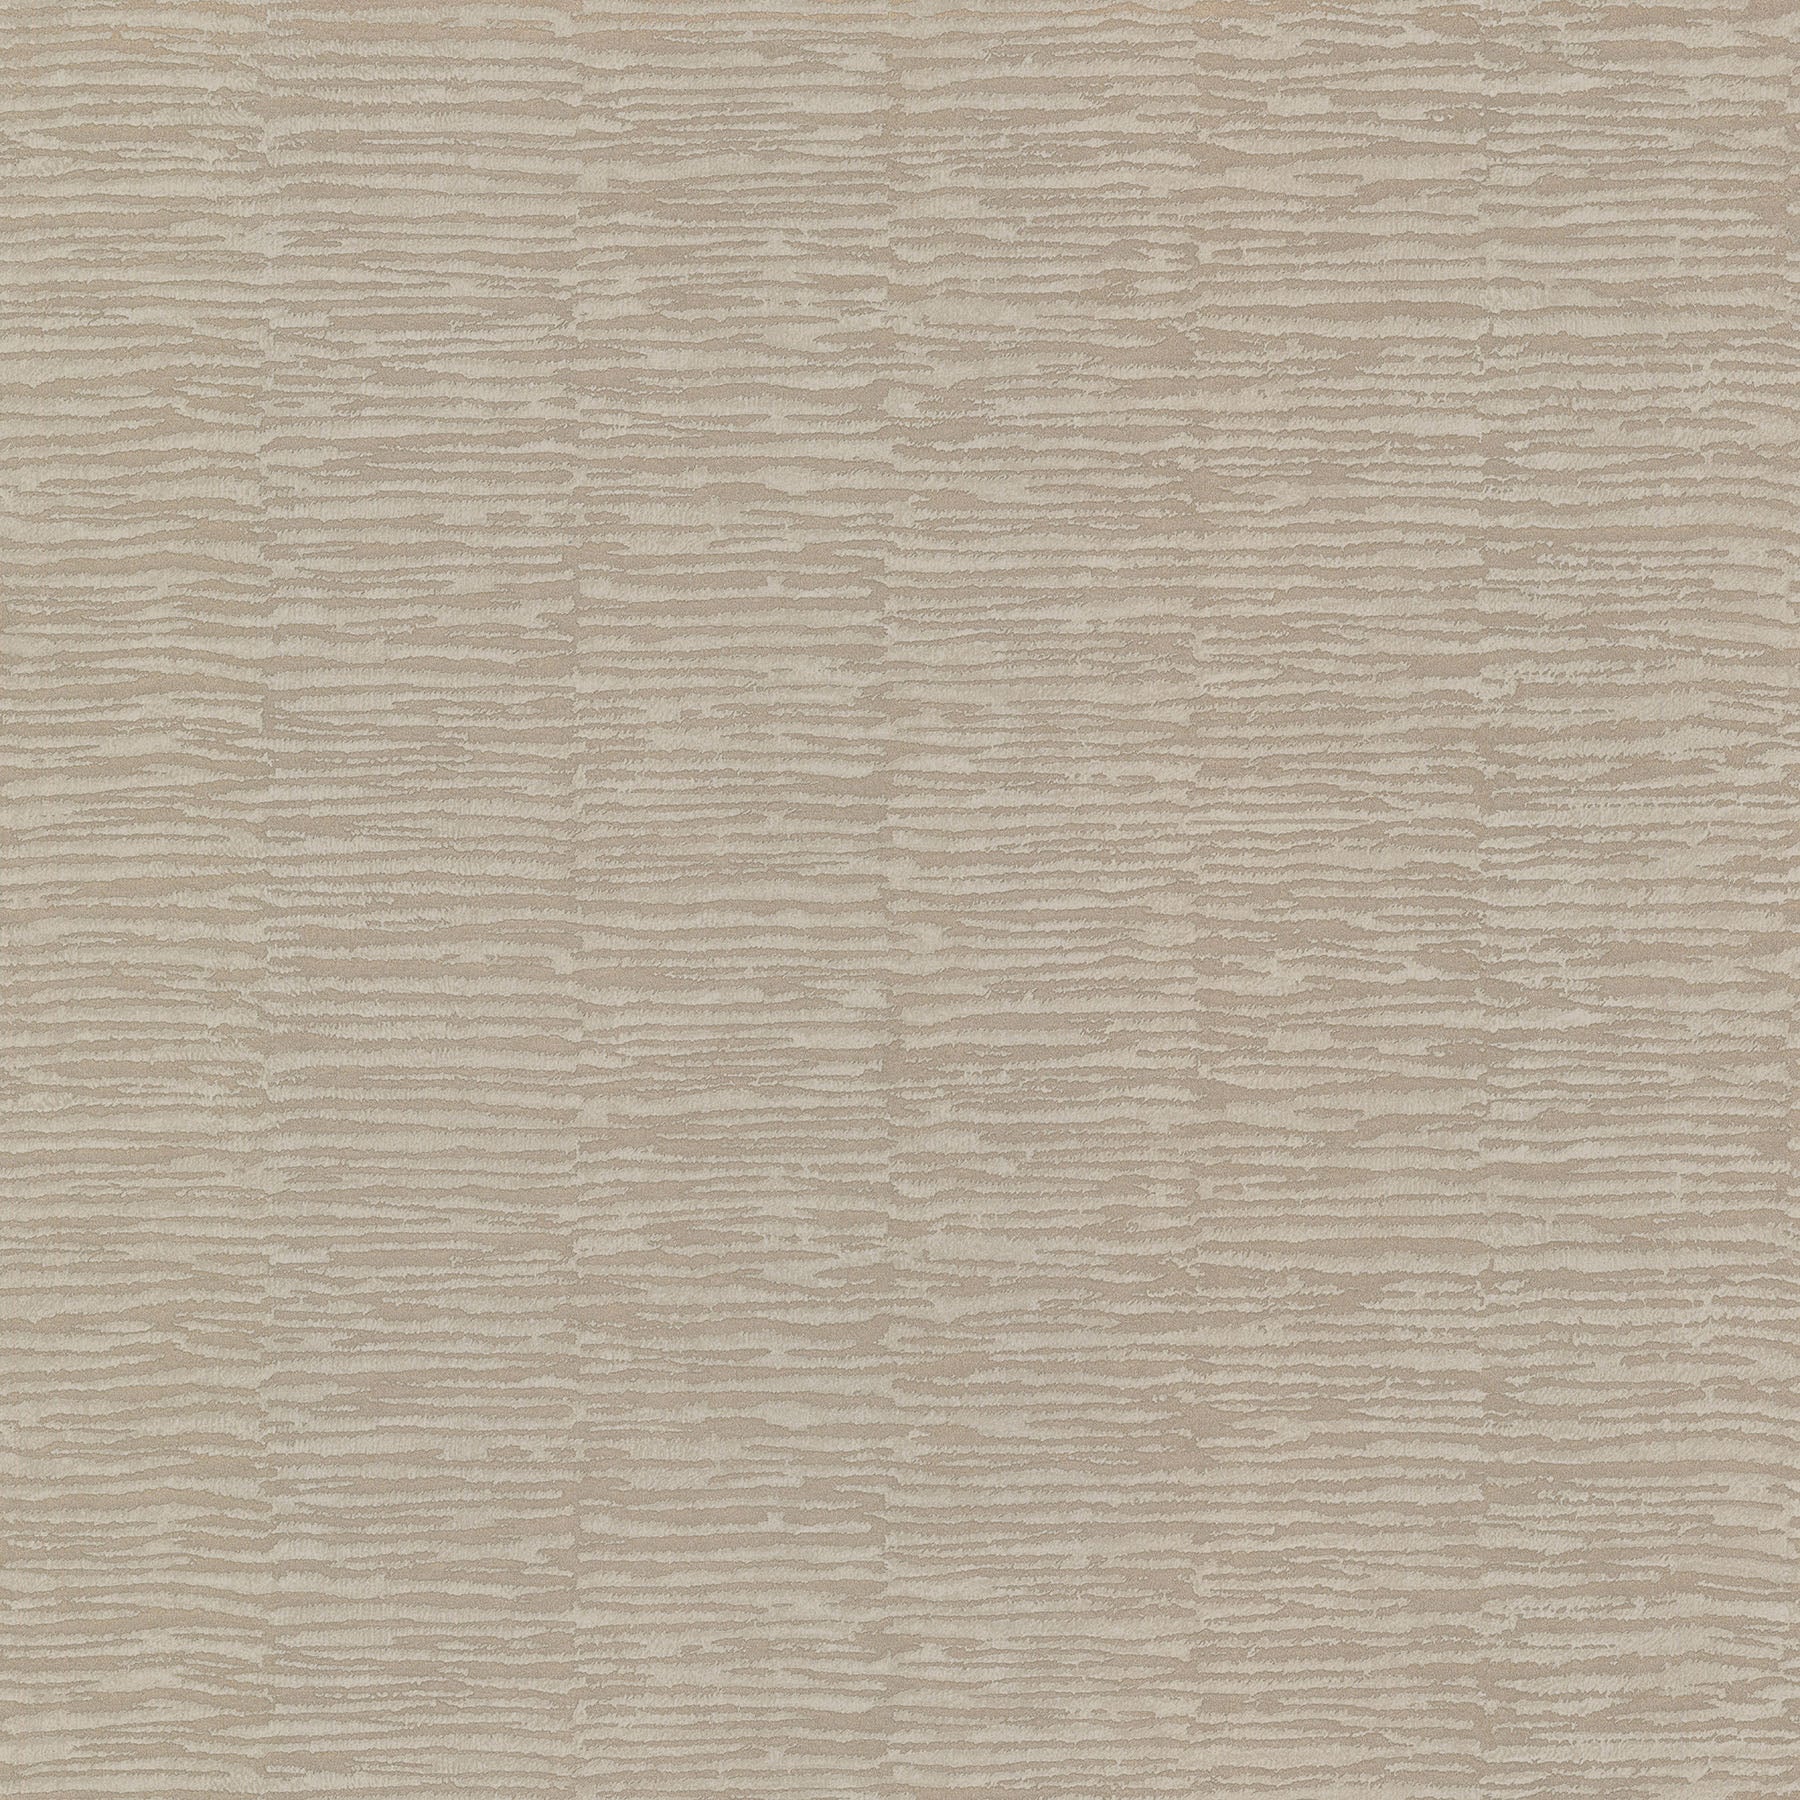 Shop 2767-24453 Goodwin Gold Bark Texture Techniques & Finishes III Brewster